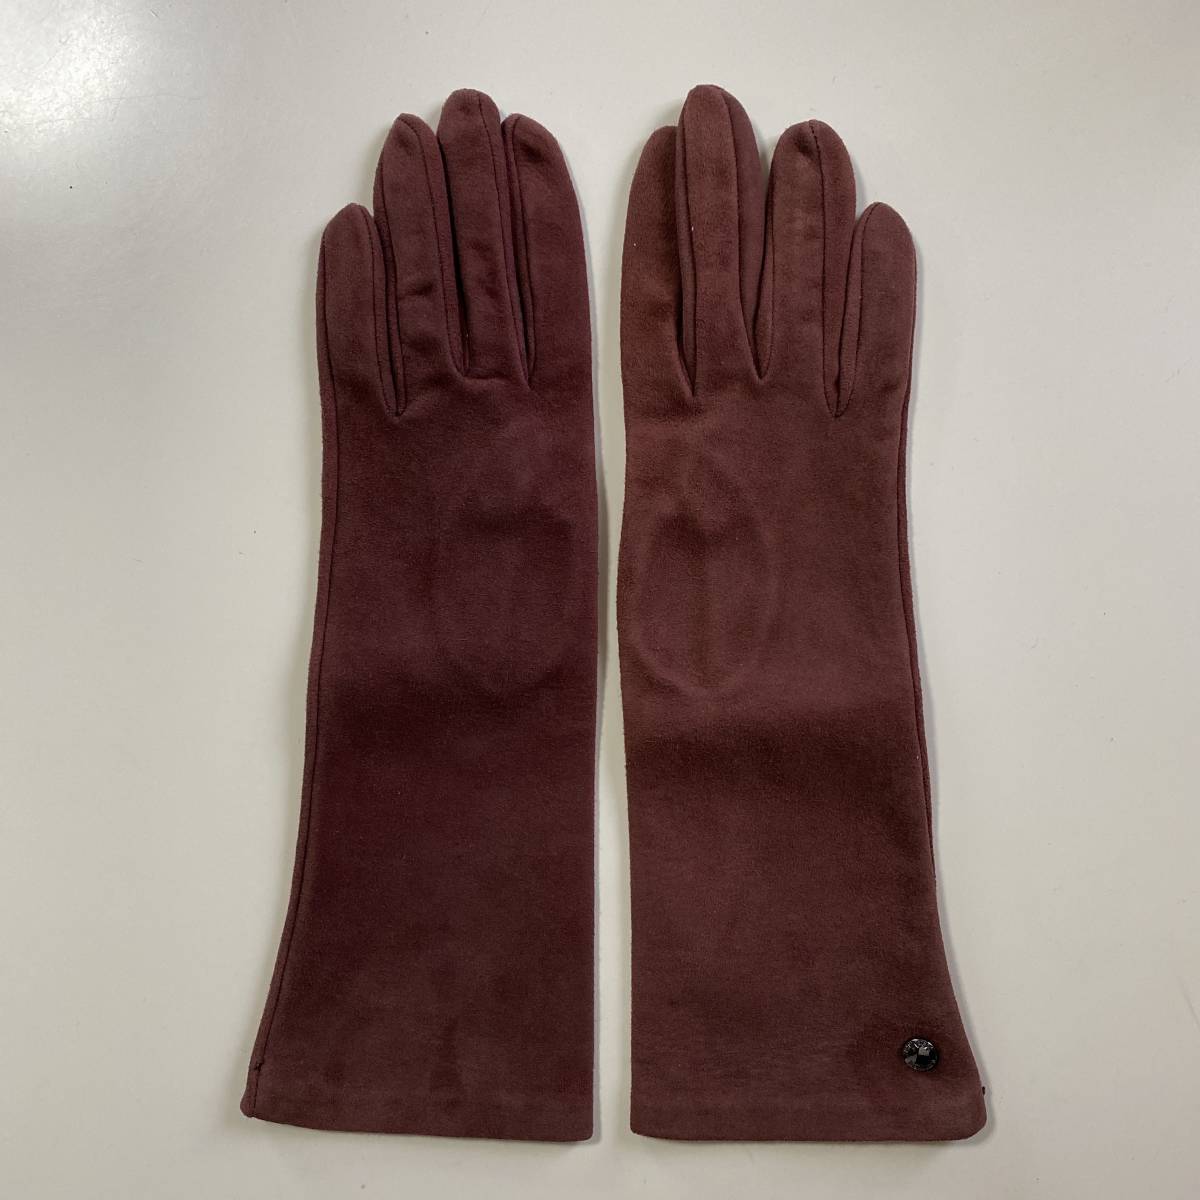 [ beautiful goods ] Italy made Max Mara lady's suede leather long glove bordeaux leather gloves size S MaxMara